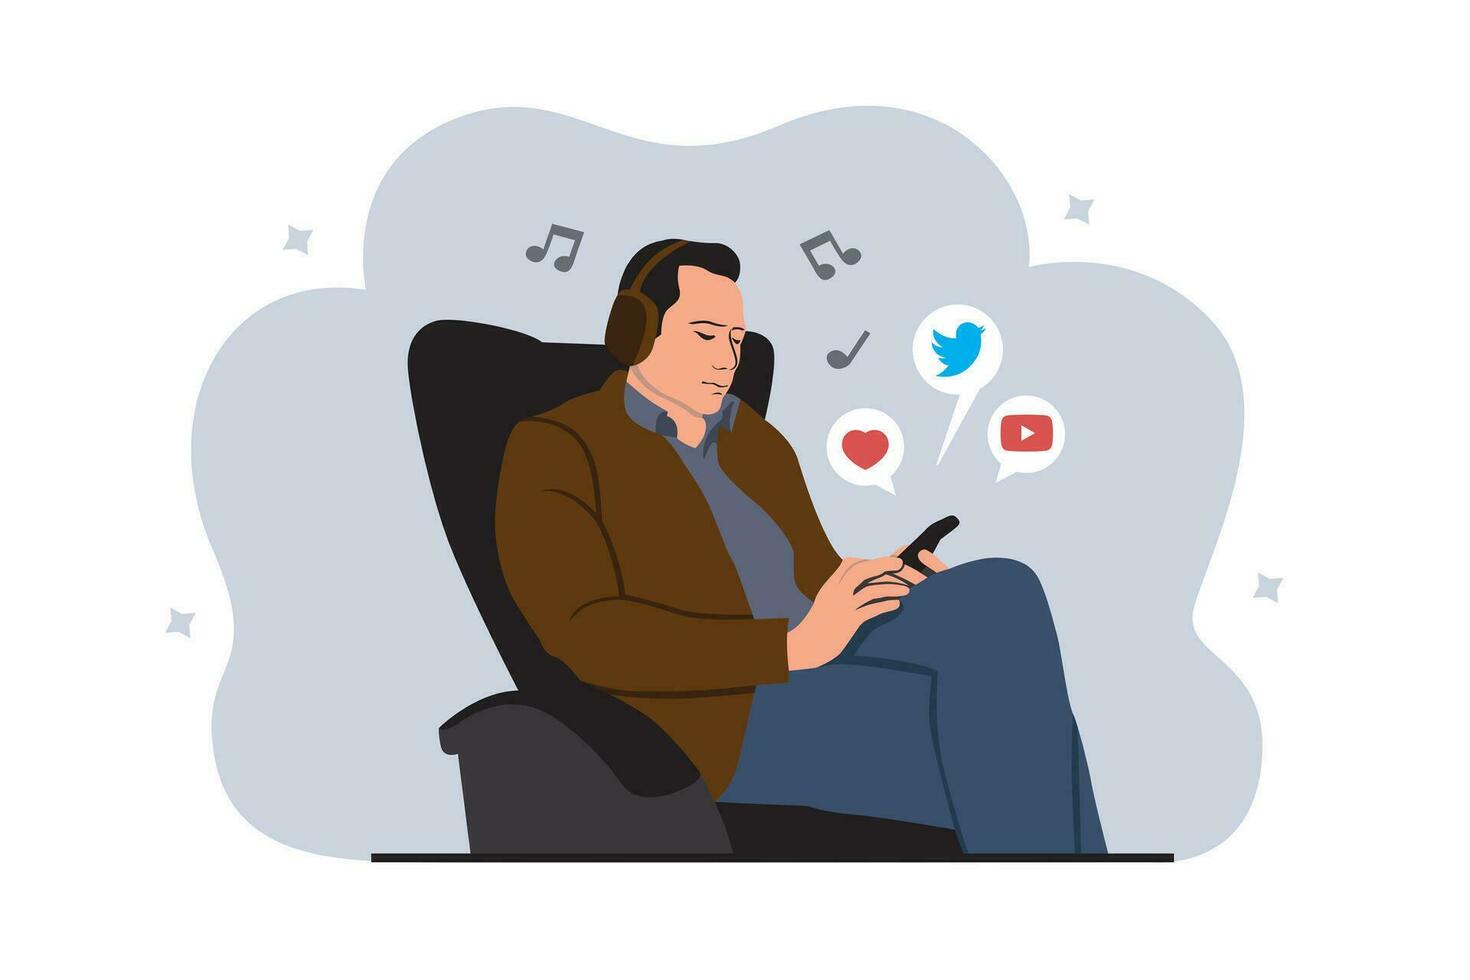 Vector illustration of a man listening to music with headphones